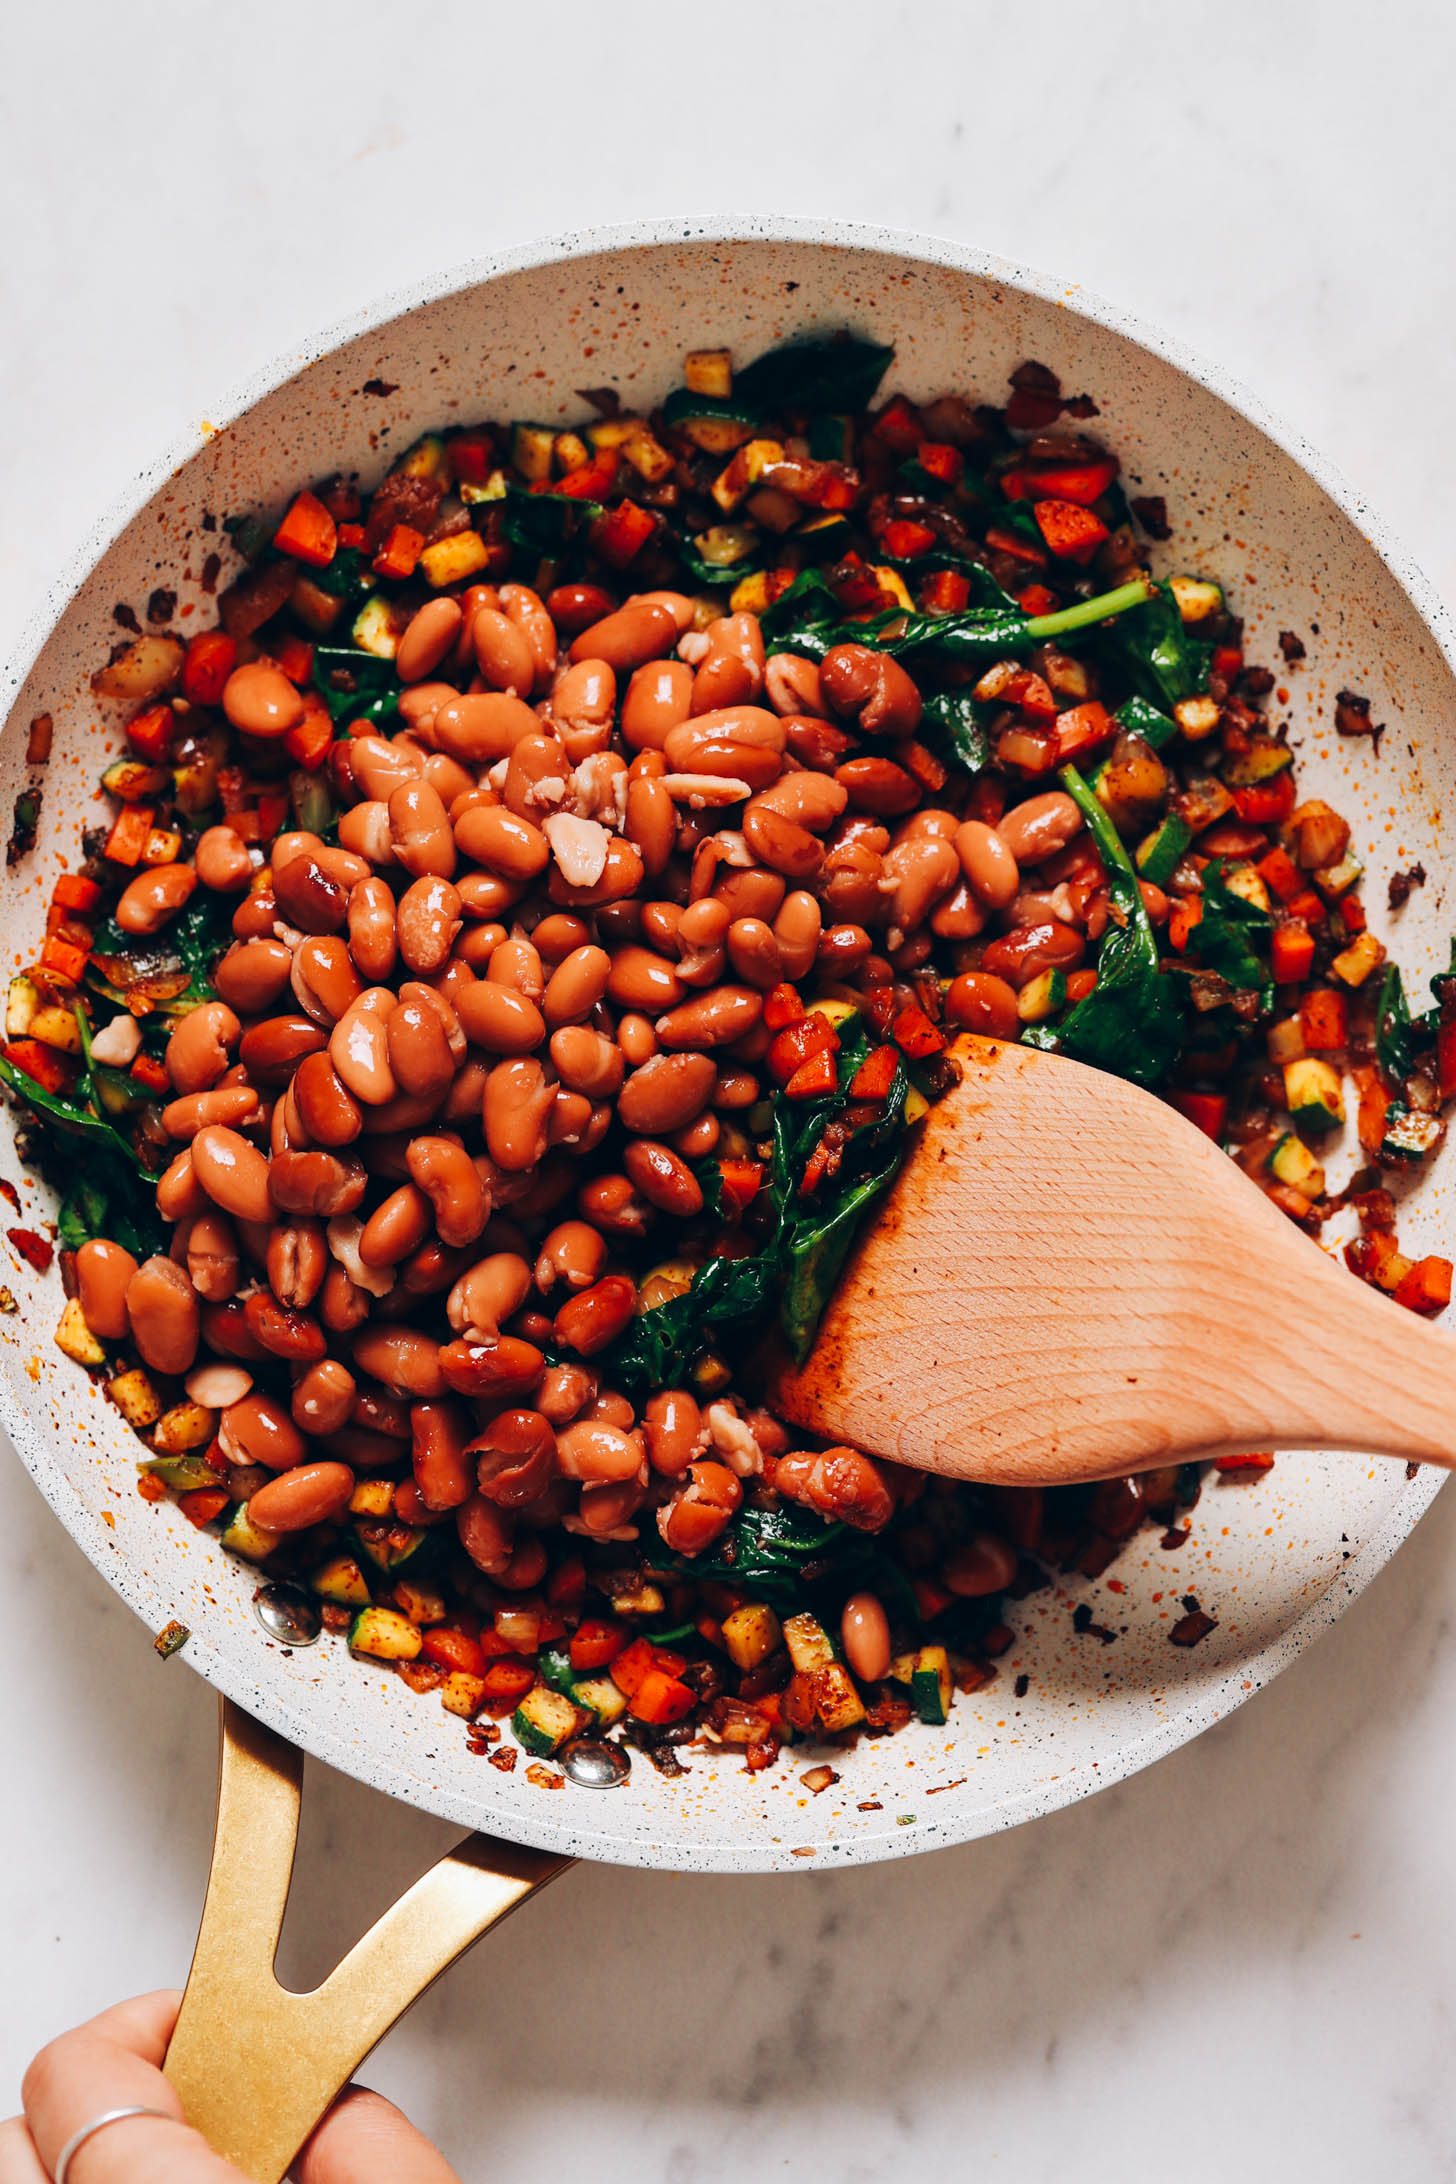 Sautéing beans and veggies in a skillet